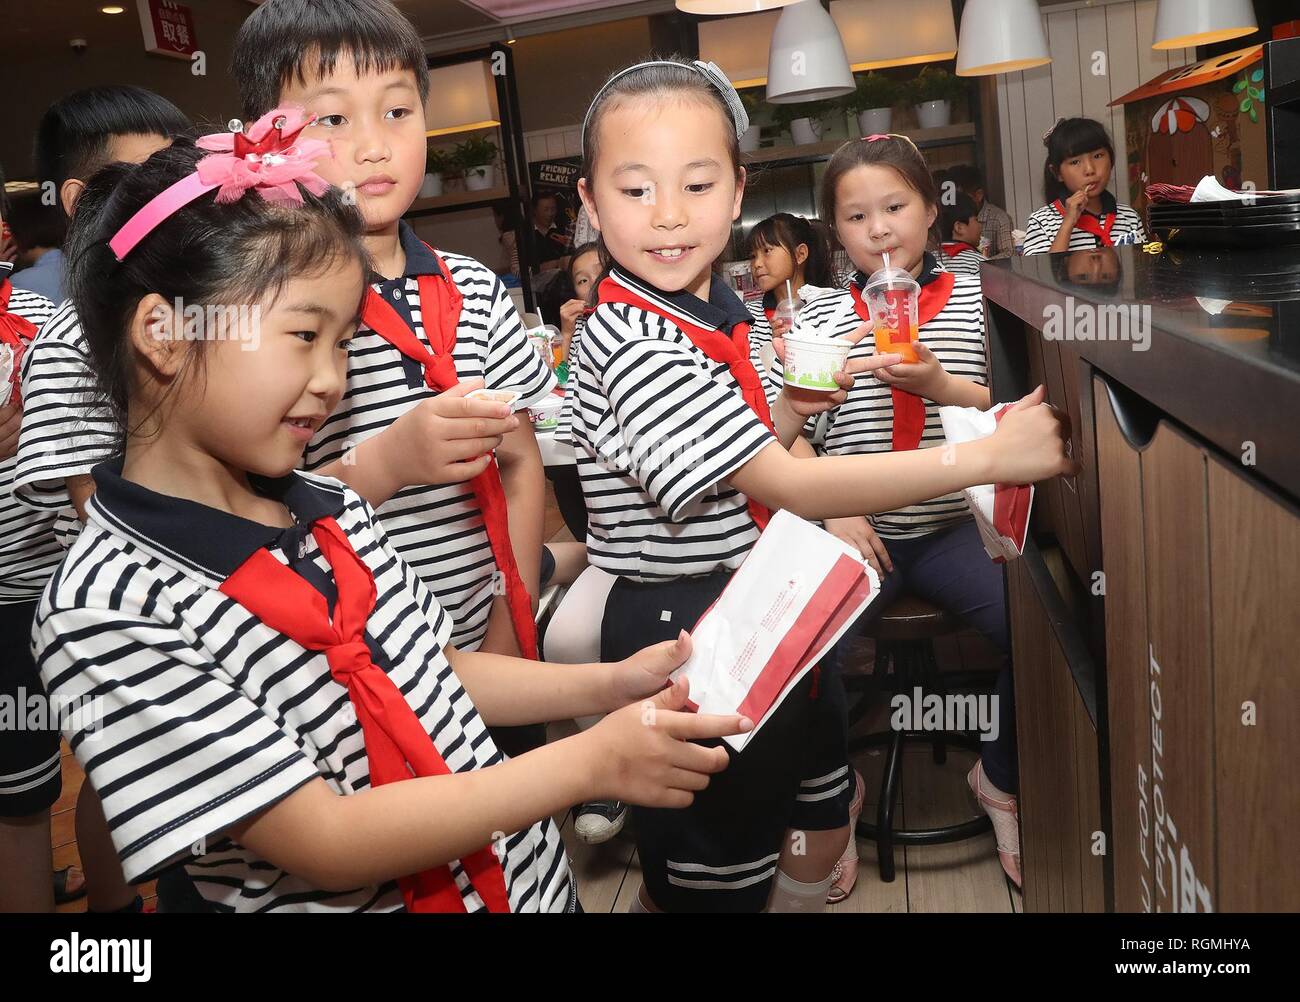 (190131) -- SHANGHAI, Jan. 31, 2019 (Xinhua) -- Primary school students learn to classify rubbish at a restaurant in Shanghai, east China, June 13, 2017. East China's Shanghai Municipality will further advance the green development in 2019, said the city's mayor Ying Yong in the municipal government work report on Sunday. According to the report, Shanghai will adhere to ecological priority, protect and improve the ecological environment and accelerate the construction of ecologically livable city. Specially, Shanghai will comprehensively promote a new round of clean air action plan, Stock Photo